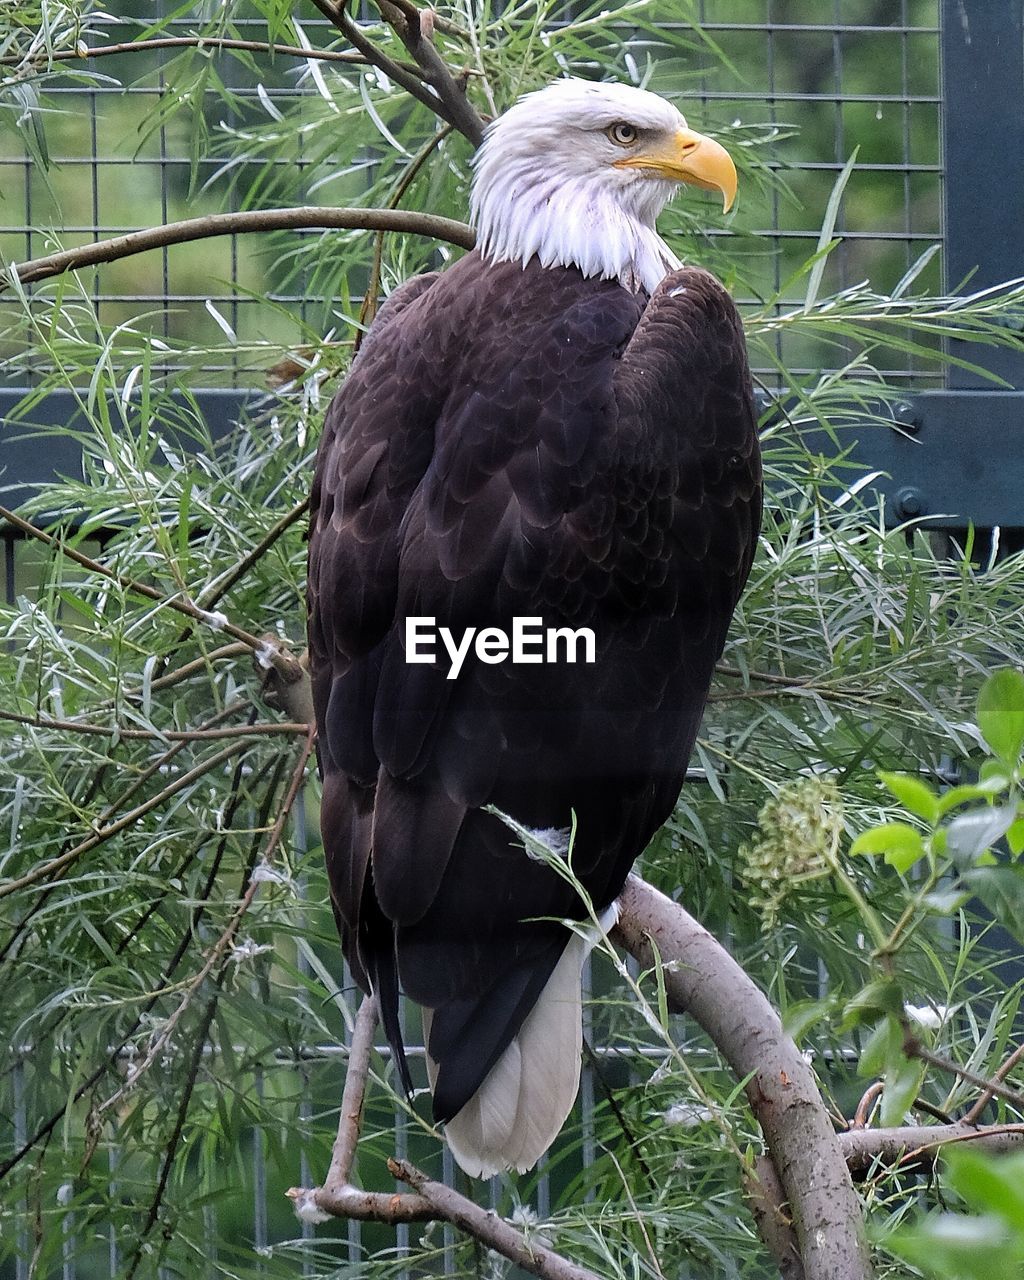 CLOSE-UP OF EAGLE PERCHING ON GRASS